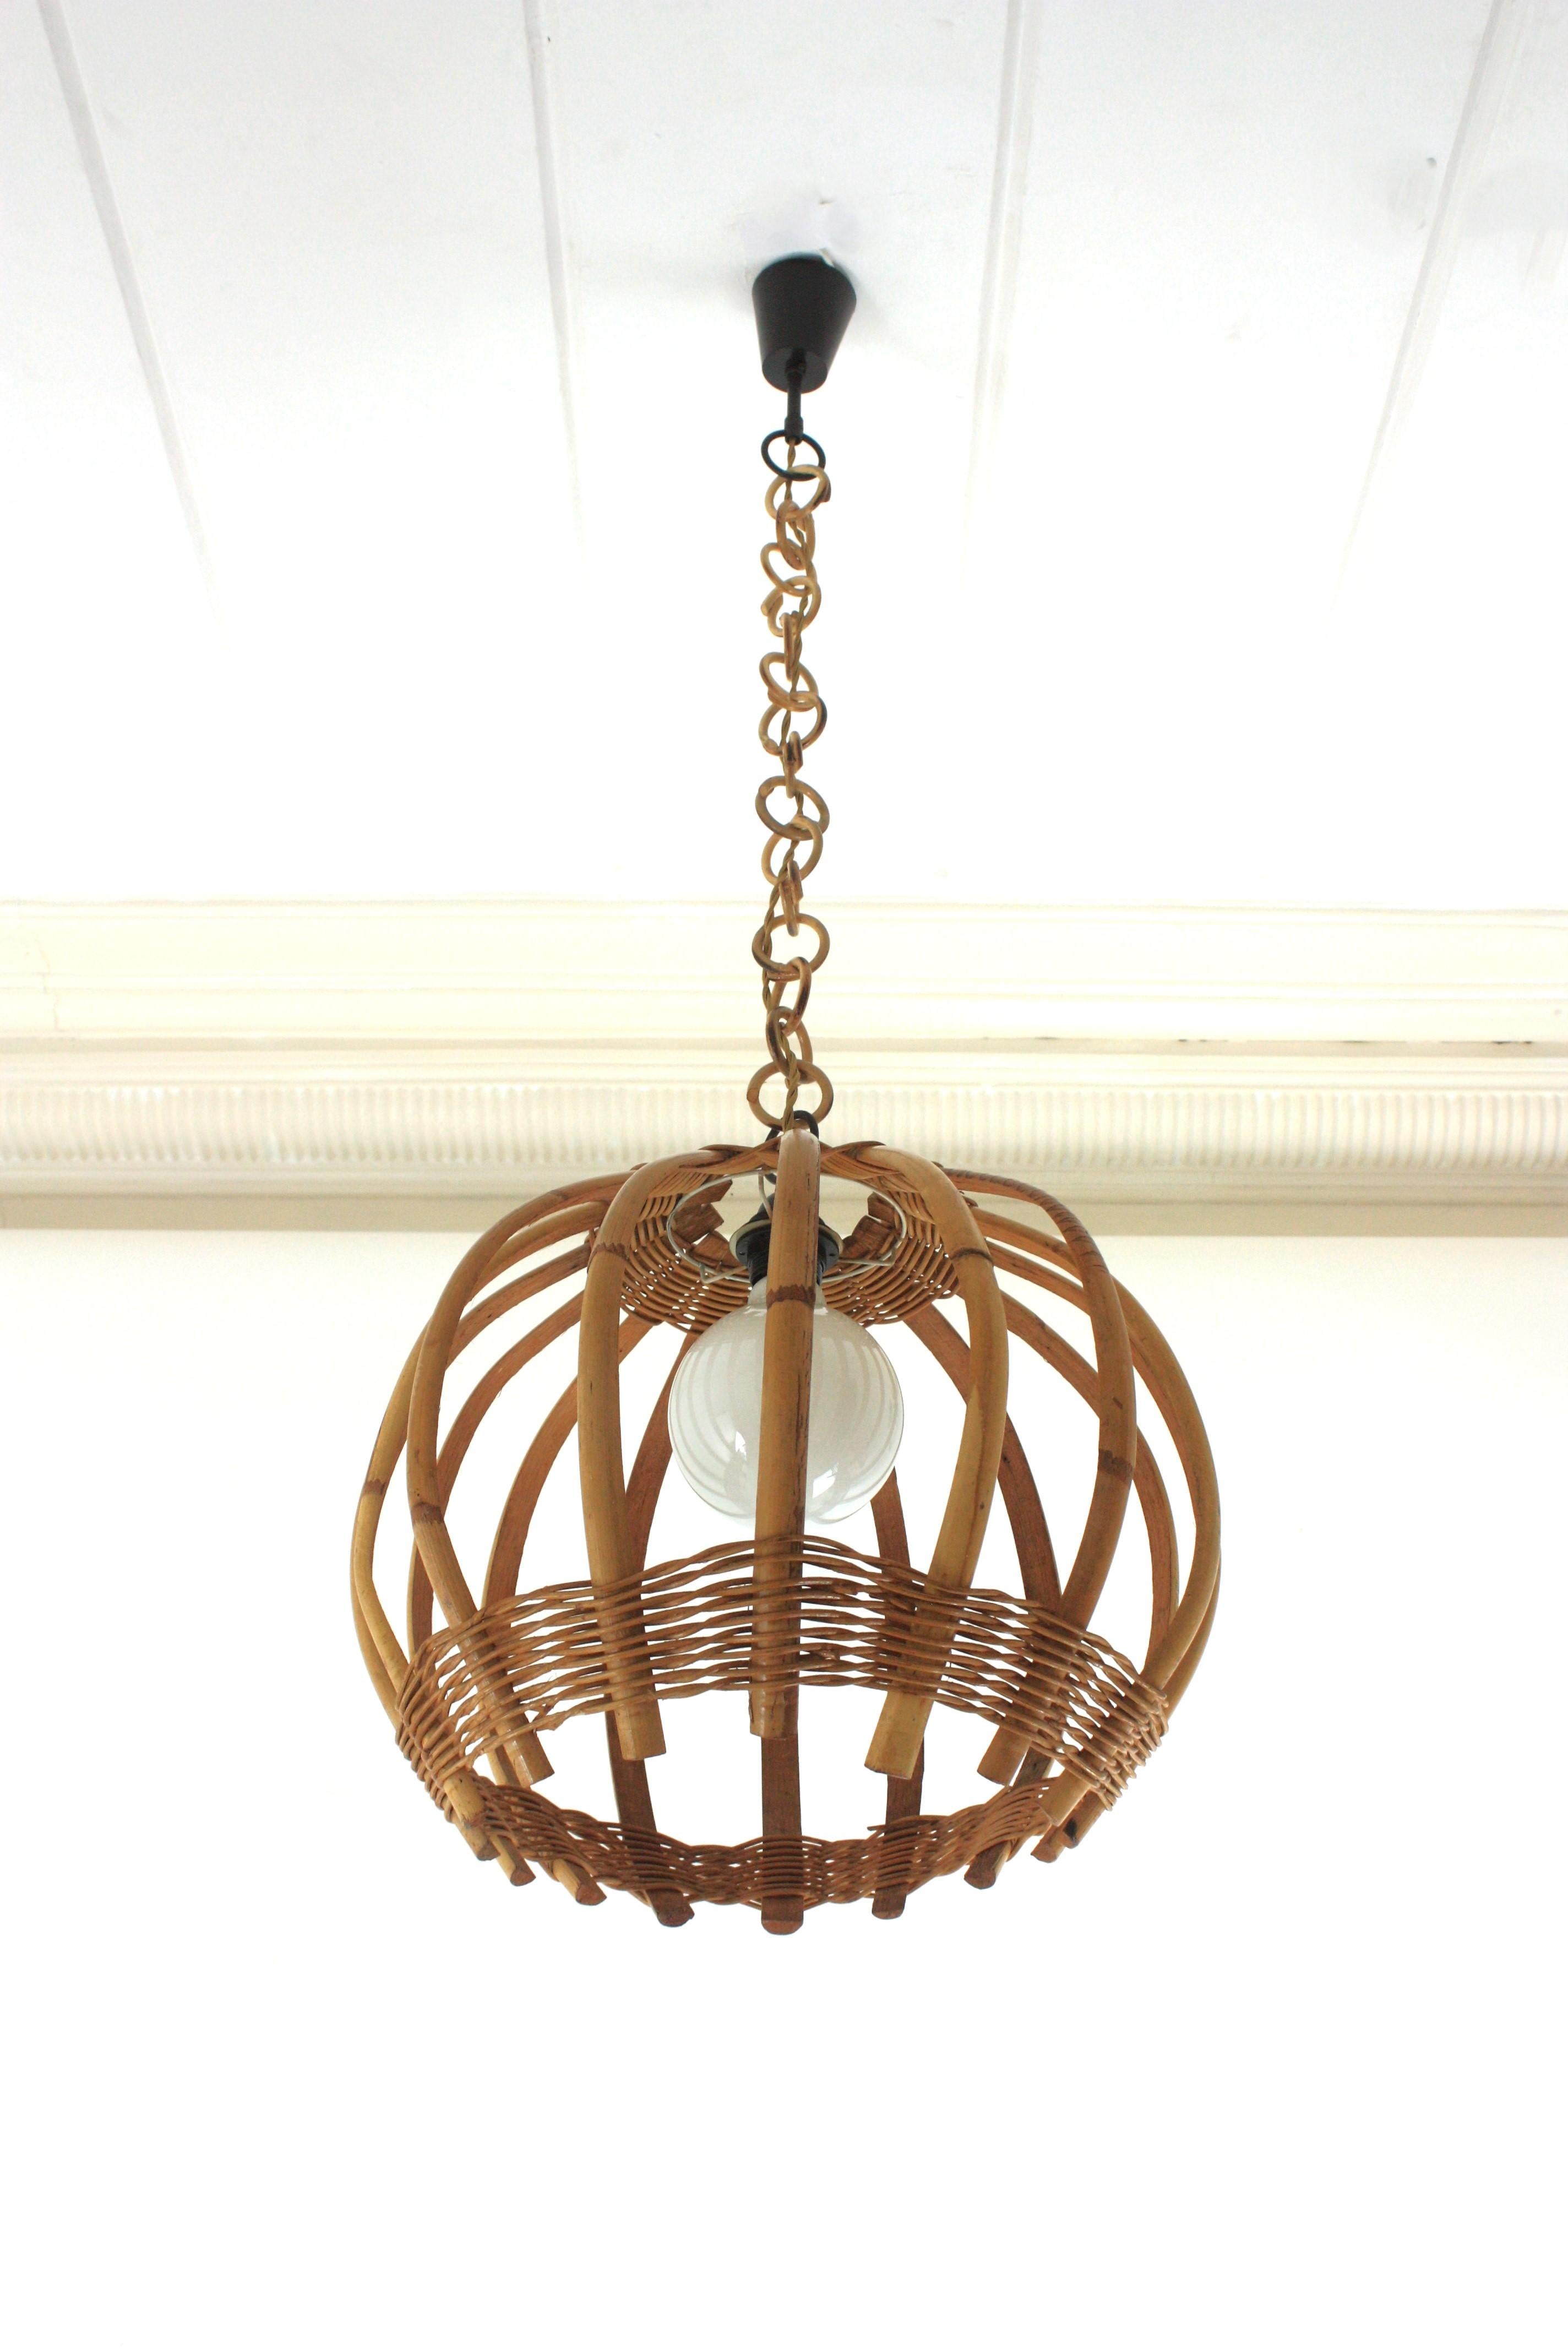 Mid-Century Modern woven wicker and bamboo large pendant / hanging light. Spain, 1960s.
This beautiful suspension lamp features a bamboo rattan structure with vertical bars detailed with hand a tier of woven wicker at the top and at the bottom part.